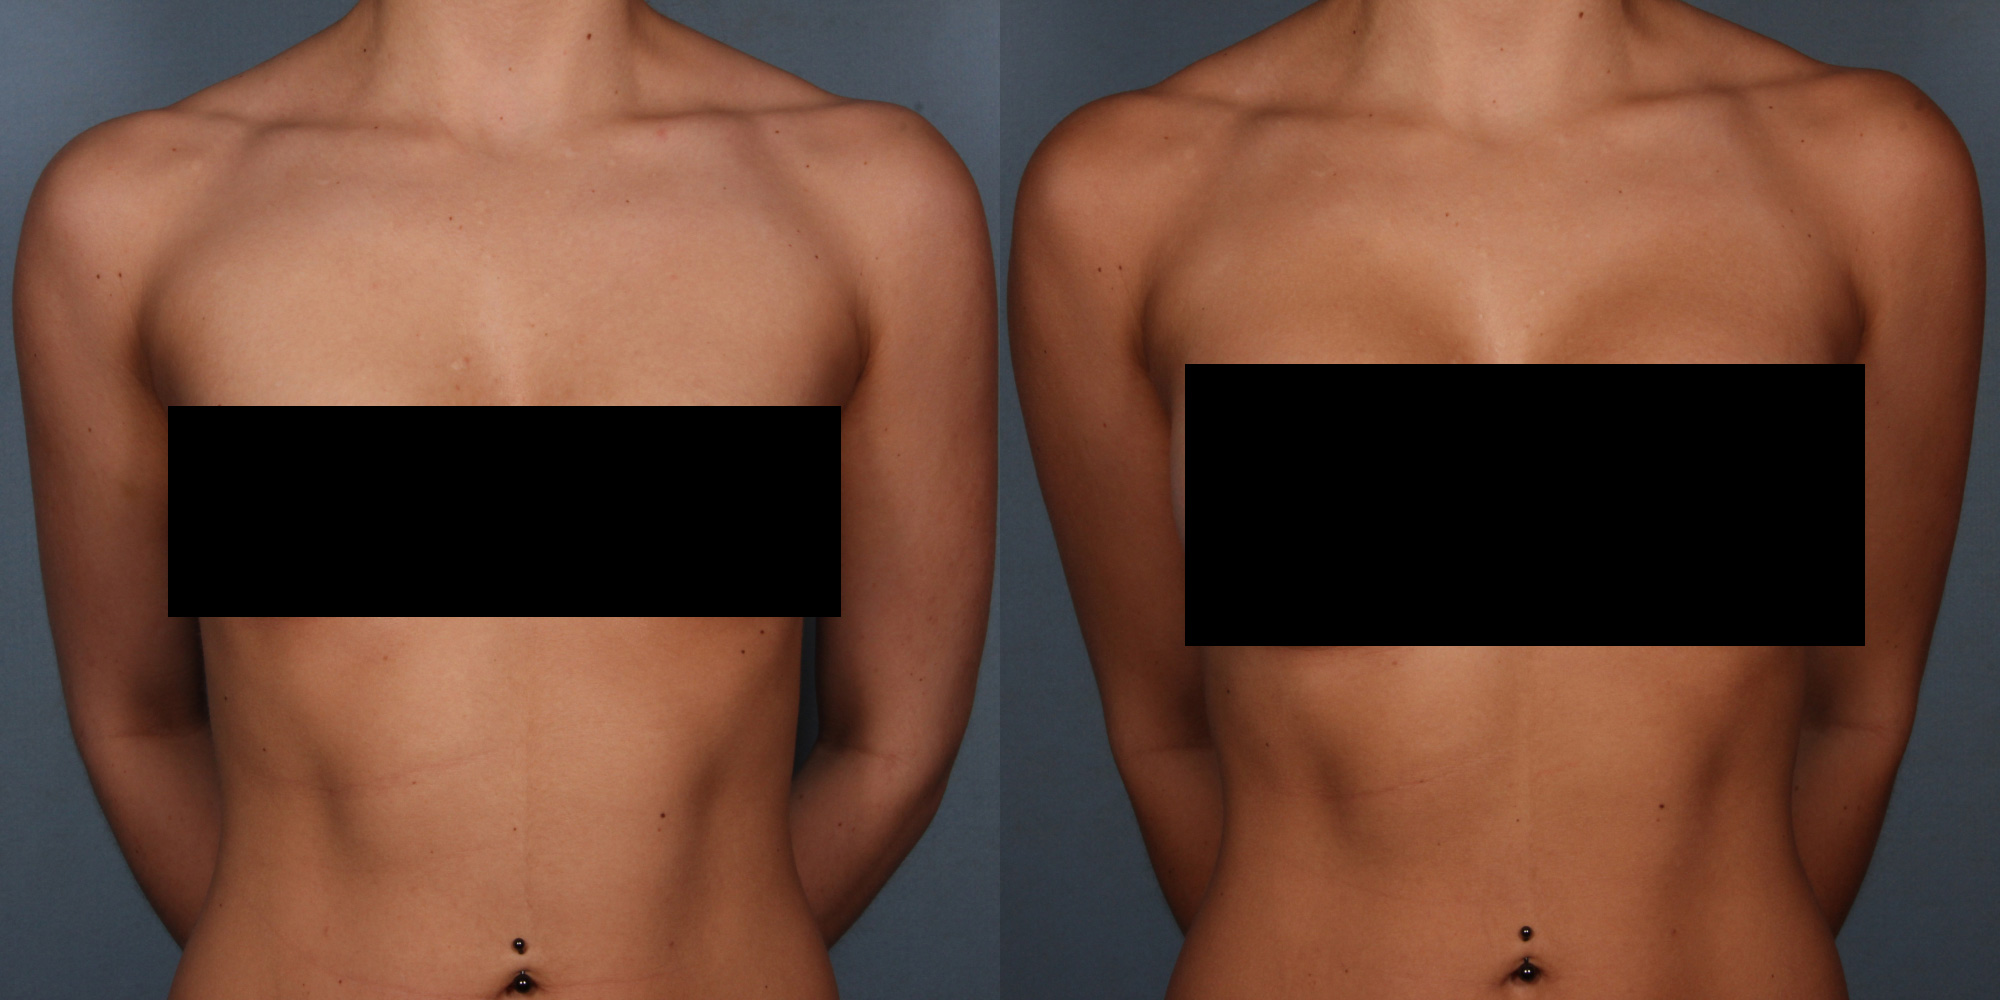 Before And After of Breast Implants In Columbia SC - Breast Augmentation